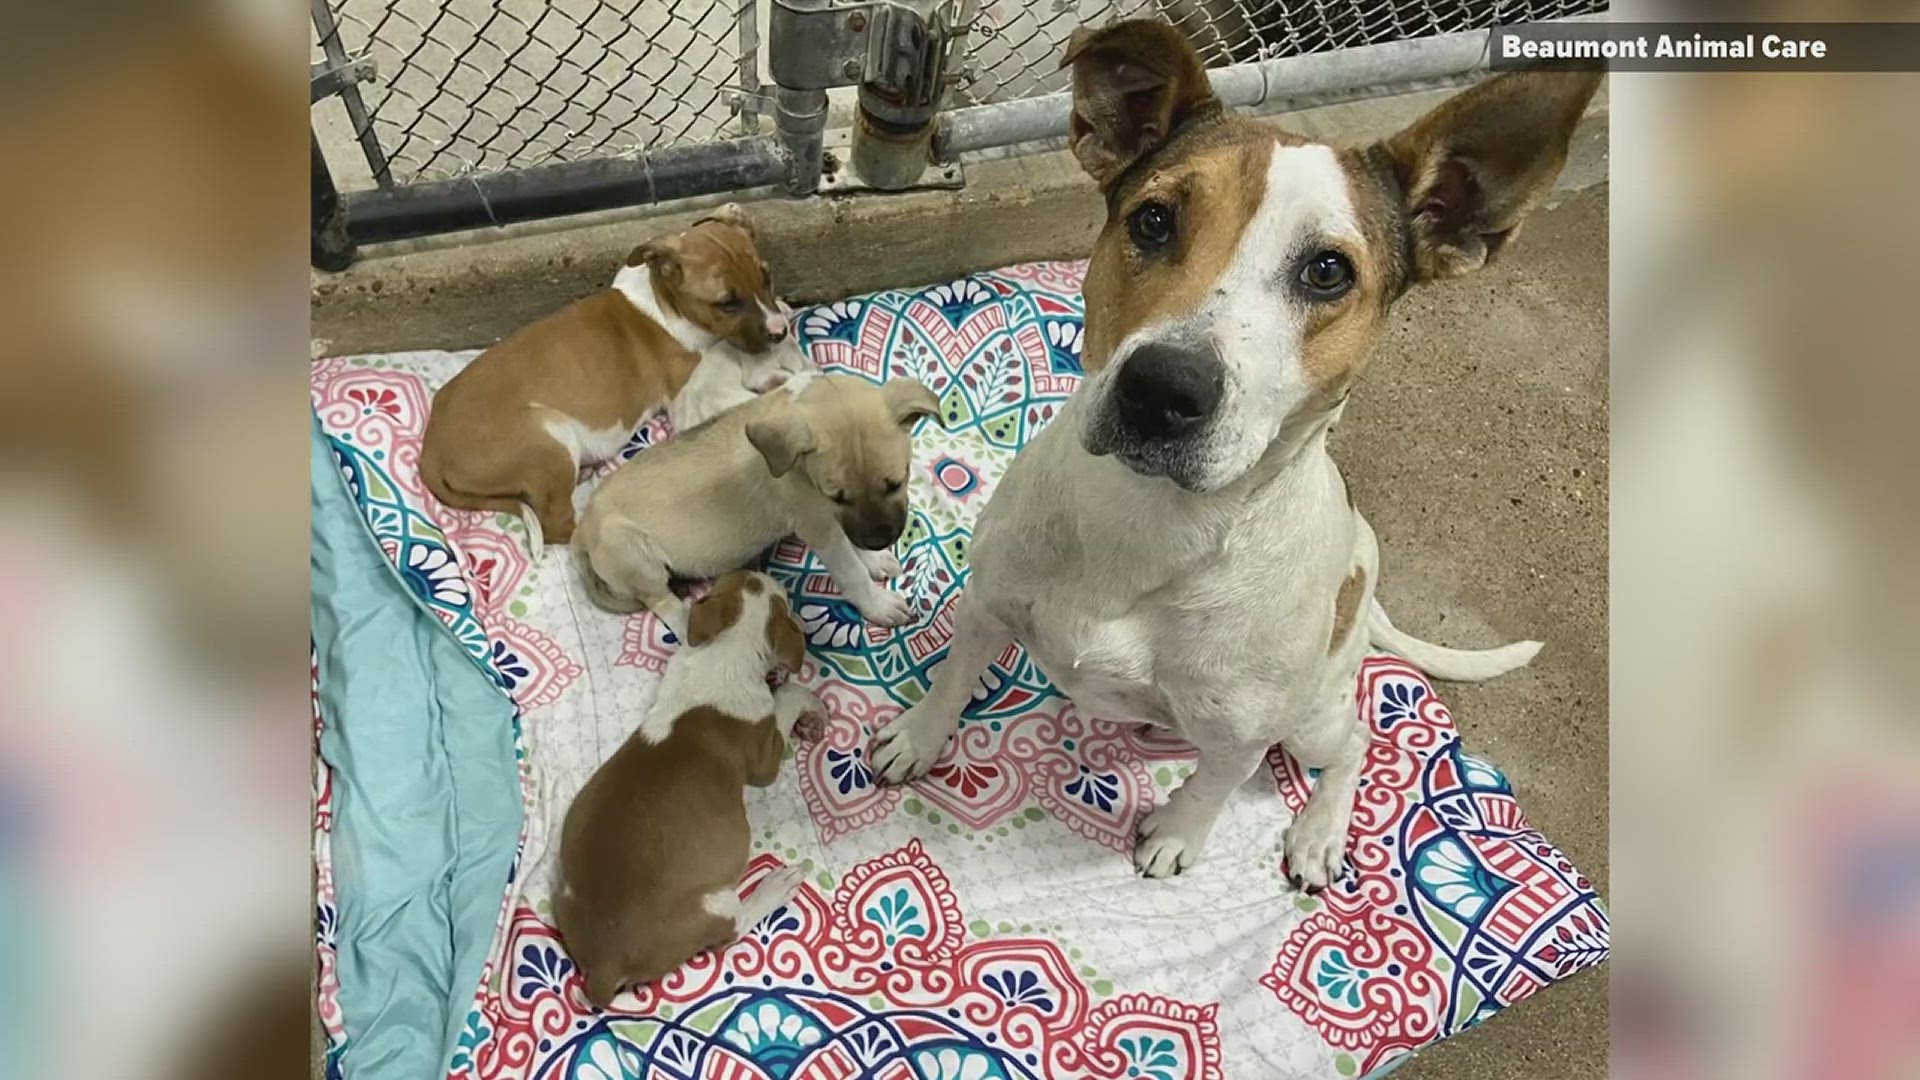 It didn't take long for the rookie Beaumont Animal Care Officer to earn her stipes after getting a call about a mother dog and her puppies living underneath a home.